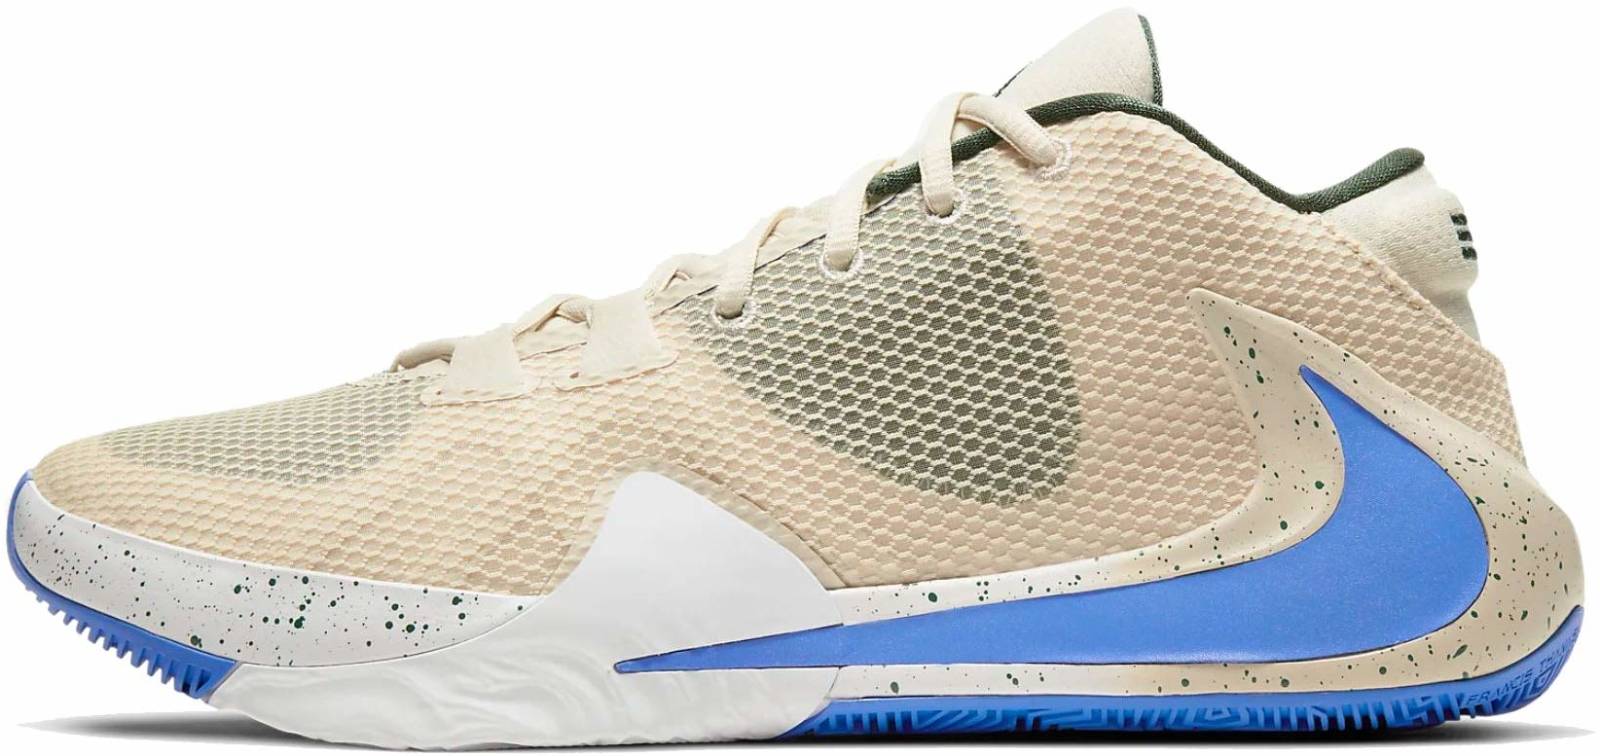 light blue and white basketball shoes